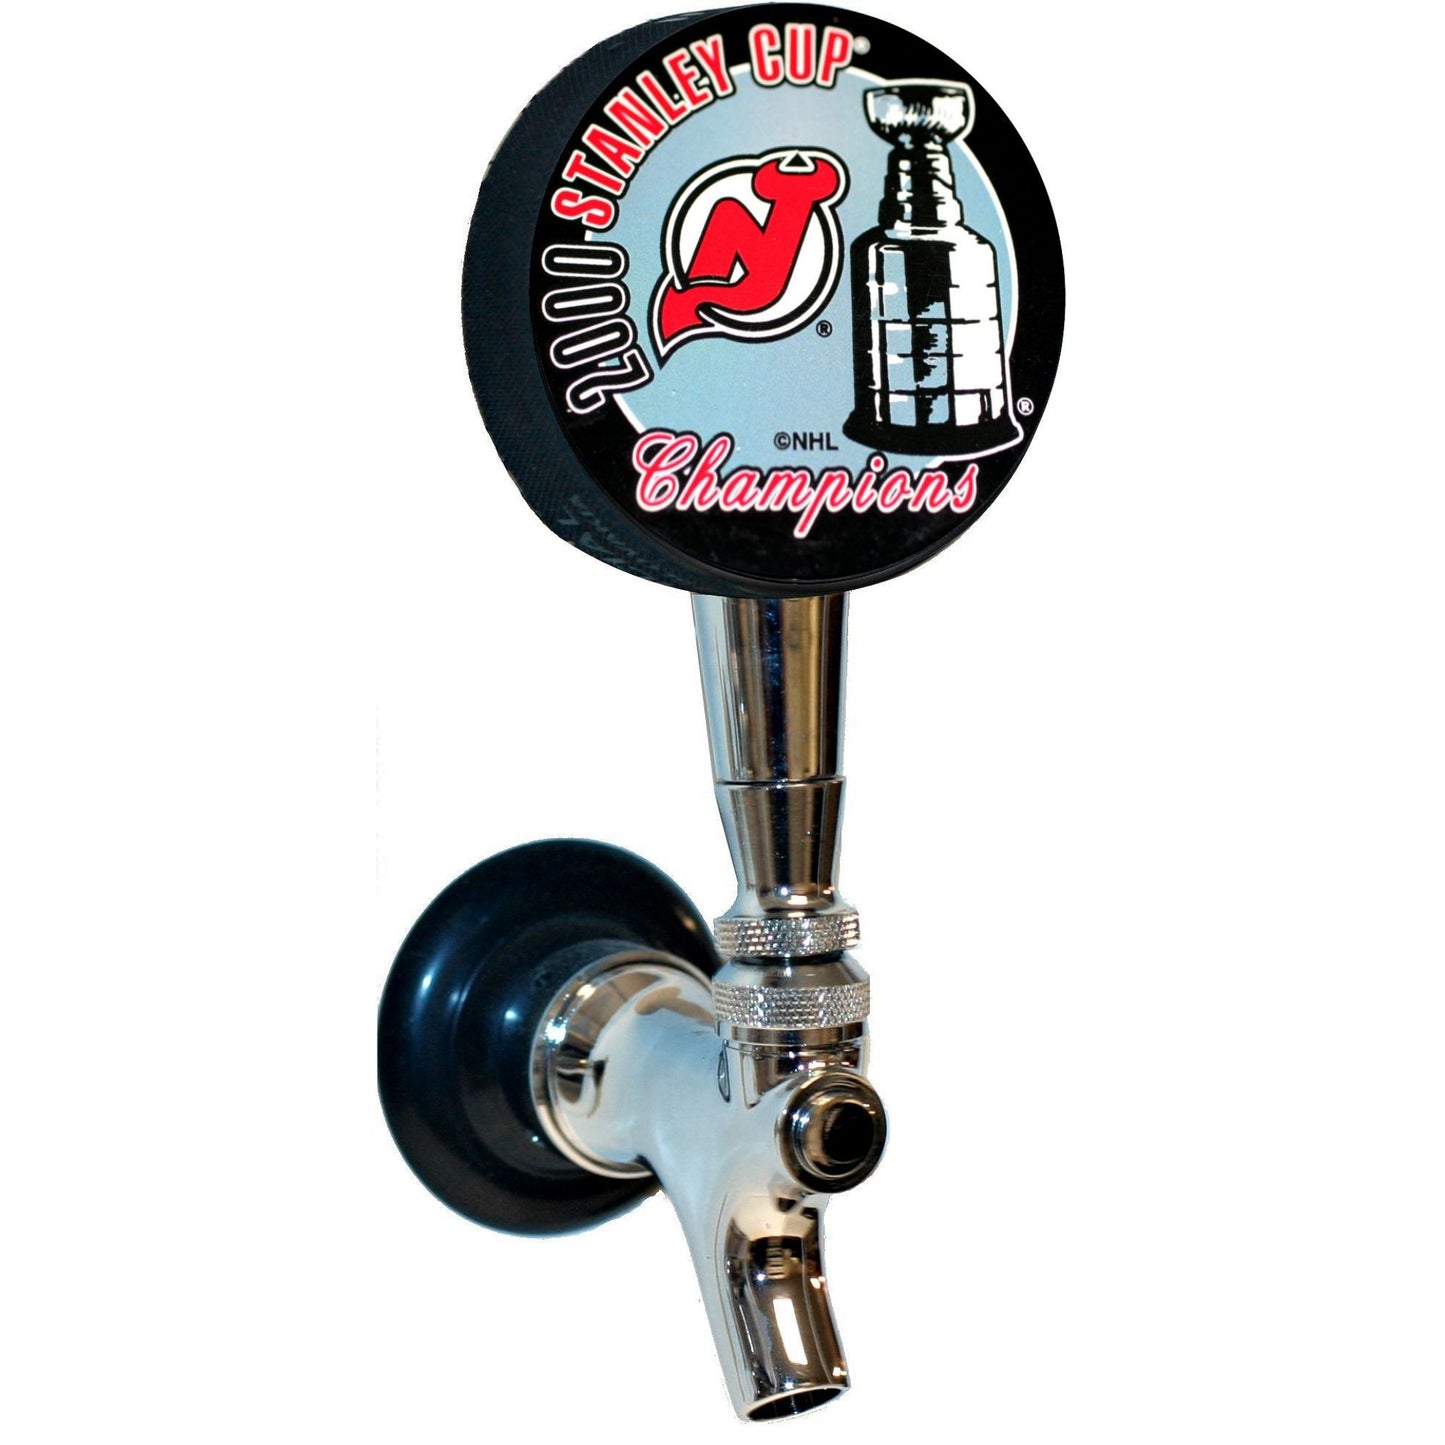 New Jersey Devils 2000 Stanley Cup Champions Hockey Puck Beer Tap Handle